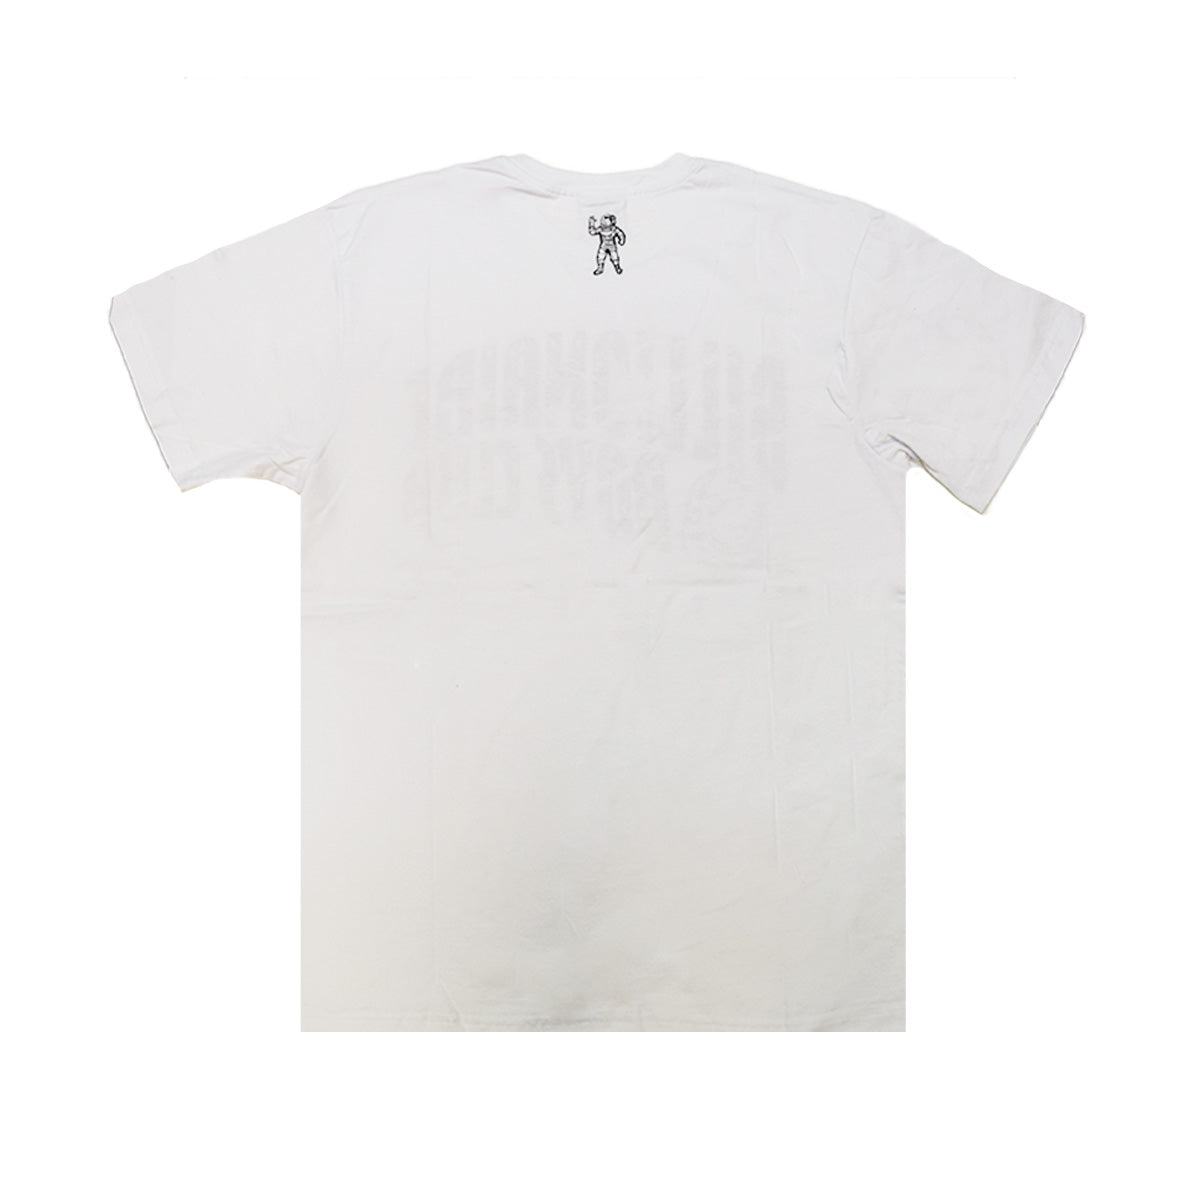 811-9200 BB COSMIC ARCH SS TEE WHITE